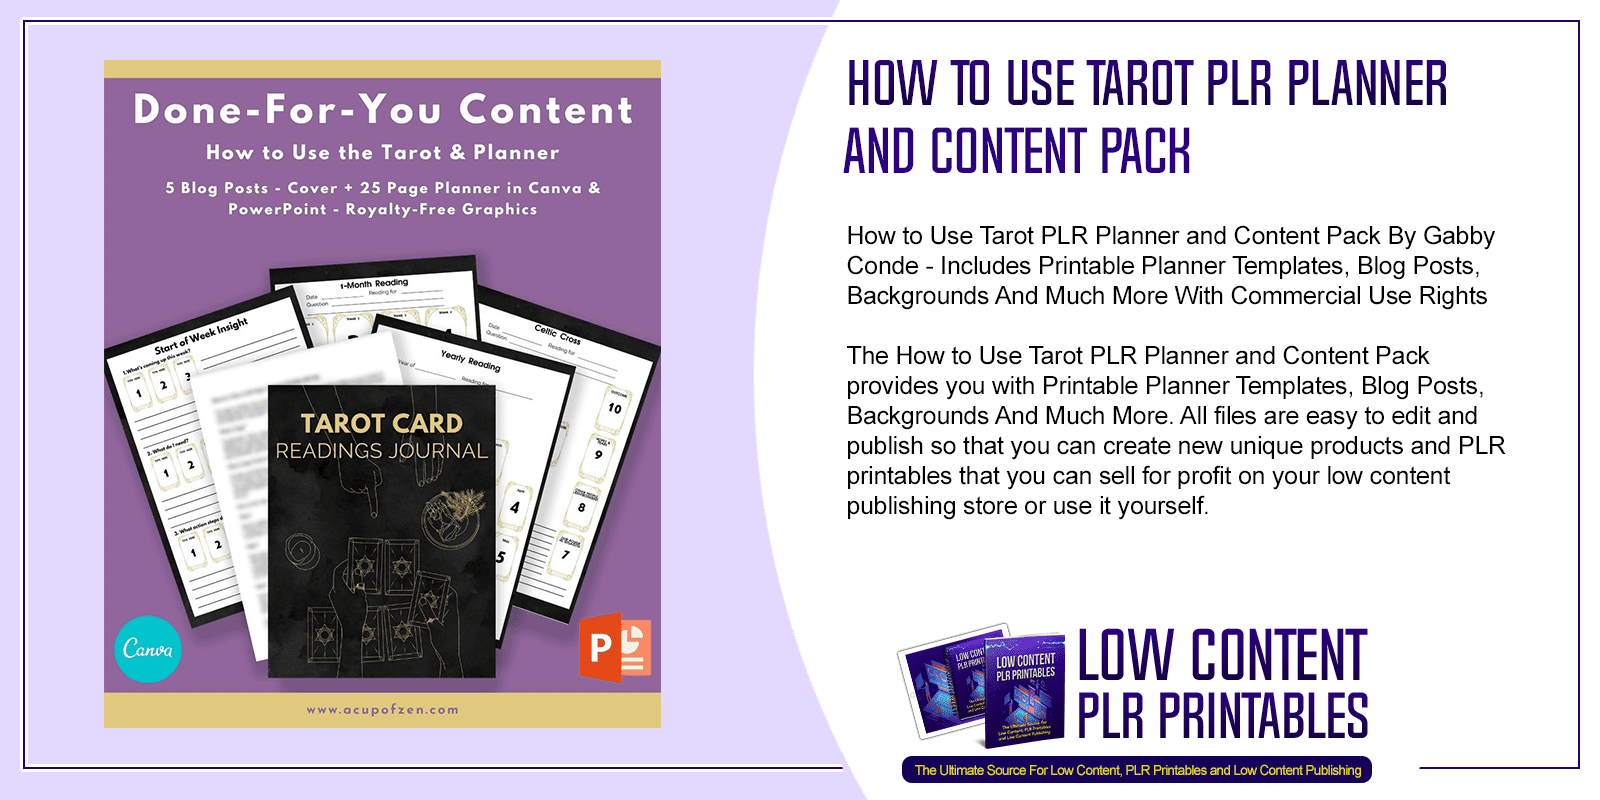 How to Use Tarot PLR Planner and Content Pack | PLR Printable Planner